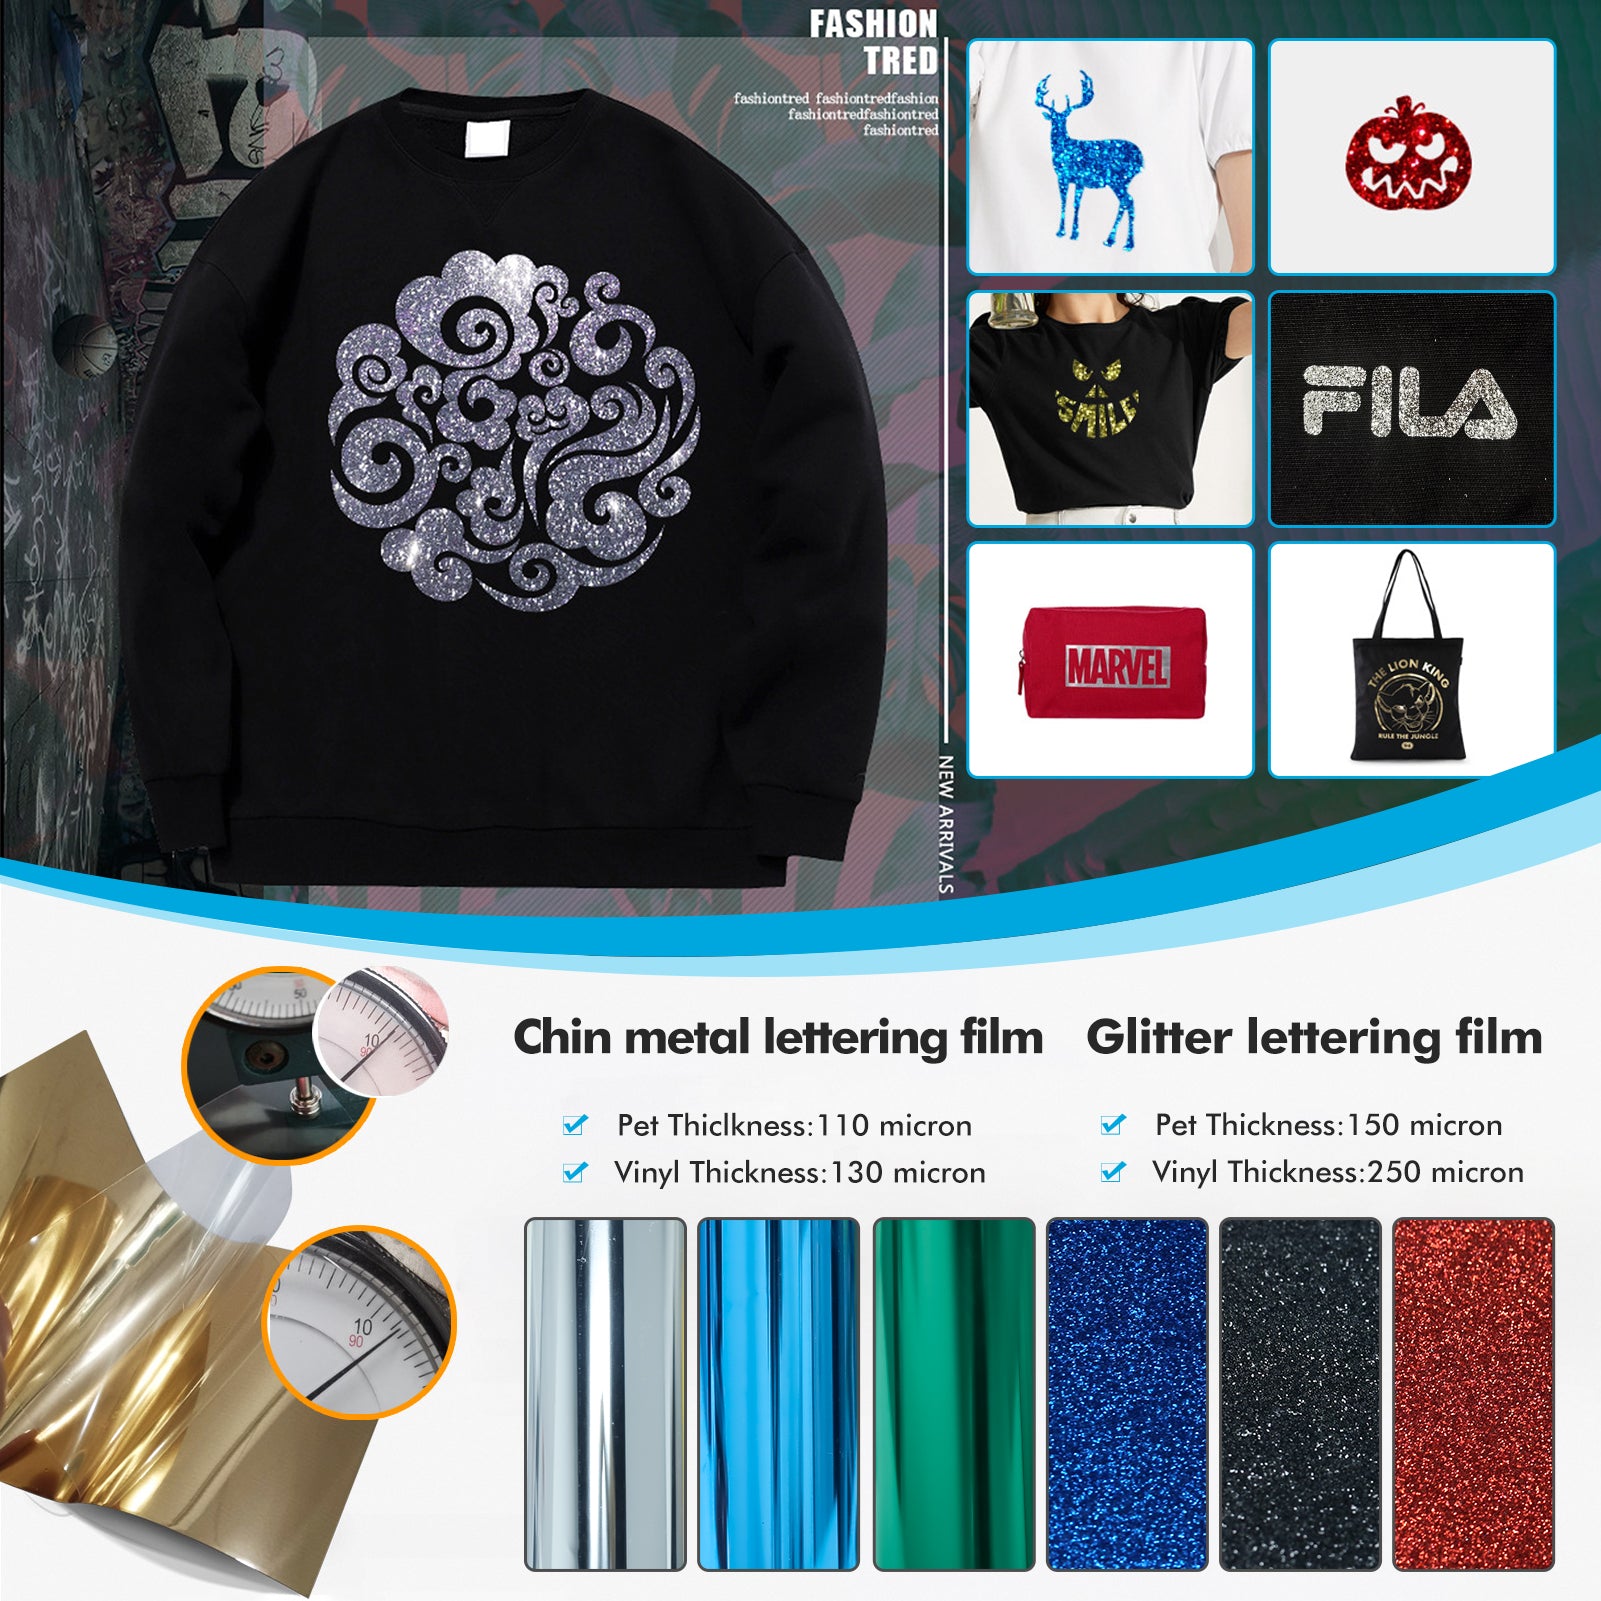 An image displaying various examples of apparel and accessories with printed designs using chin metal lettering film and glitter lettering film. Items include a black sweater with a swirling design, various T-shirts, vinyl rolls in metallic colors, and glitter—all created with precision using 10pcs HTV Heat Transfer Vinyl Paper for Falcon Laser Engraving by CrealityFalcon.